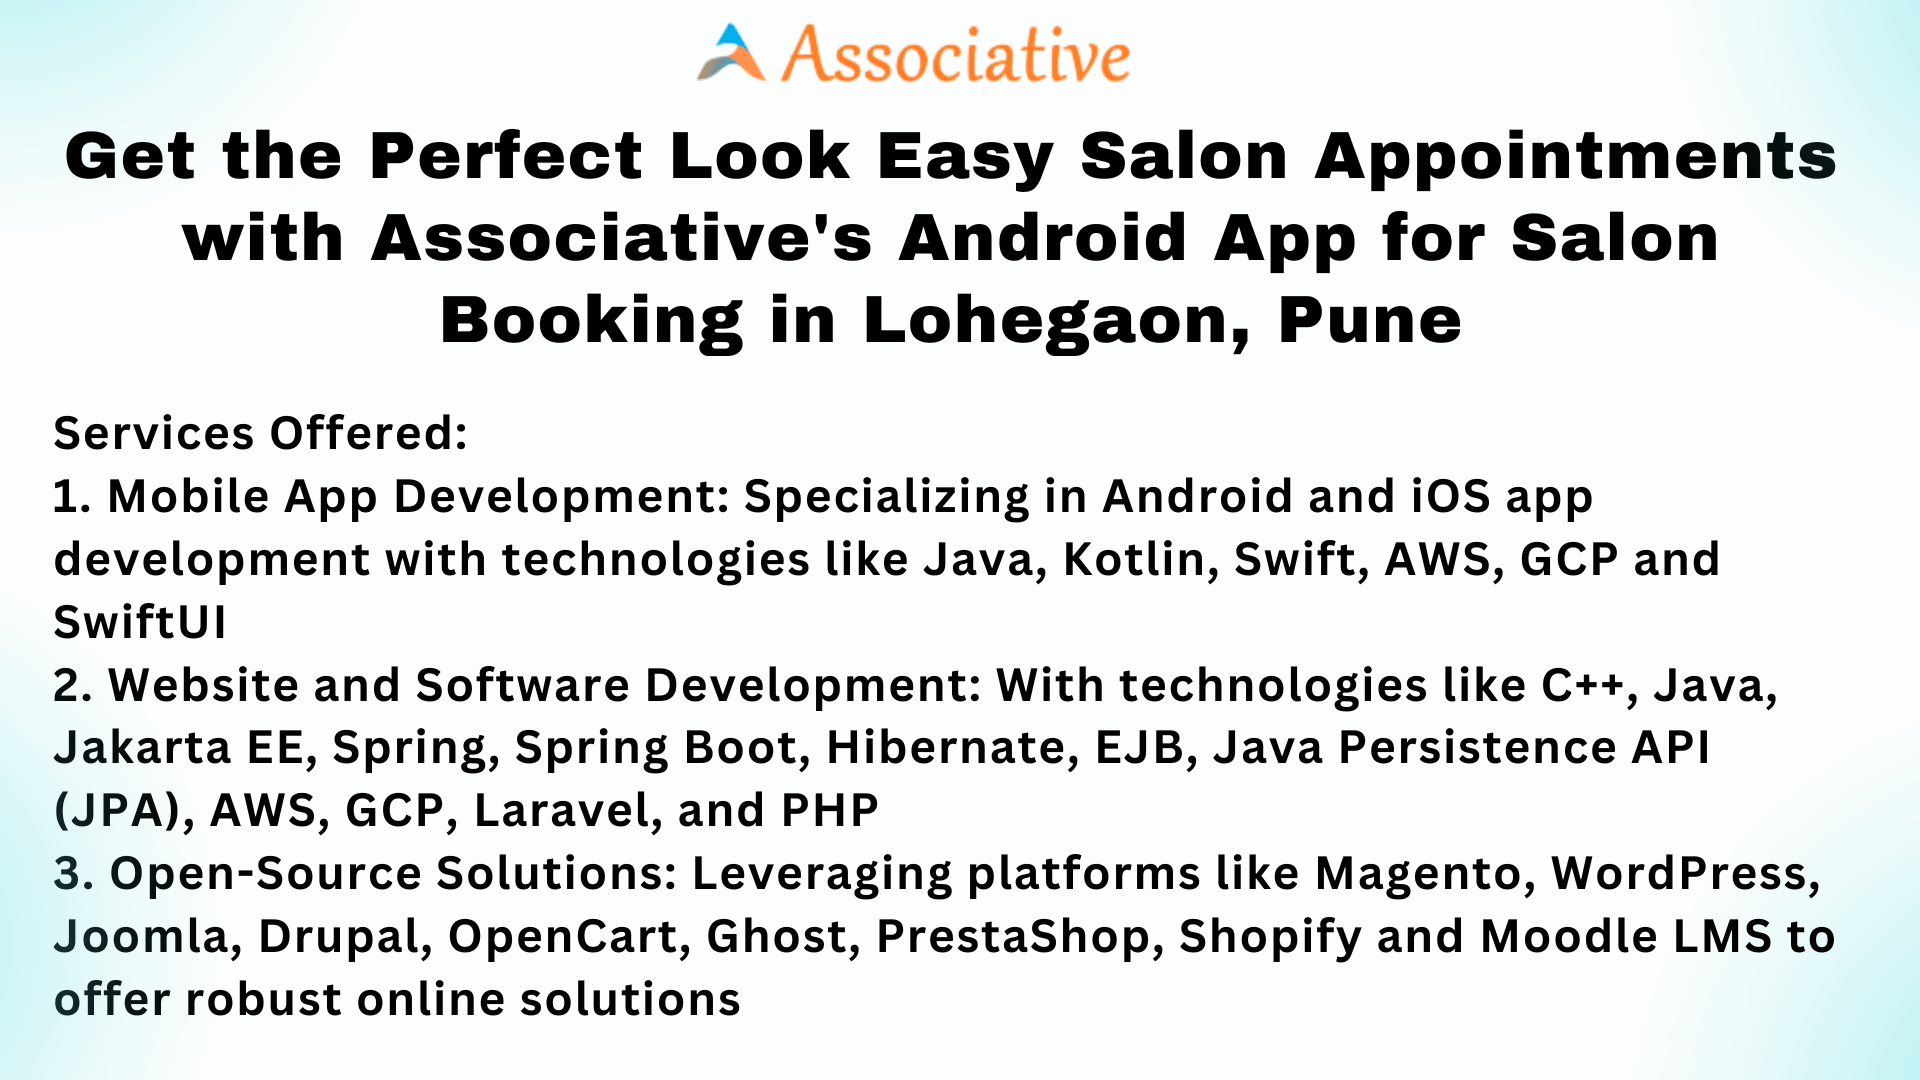 Get the Perfect Look Easy Salon Appointments with Associative's Android App for Salon Booking in Lohegaon, Pune